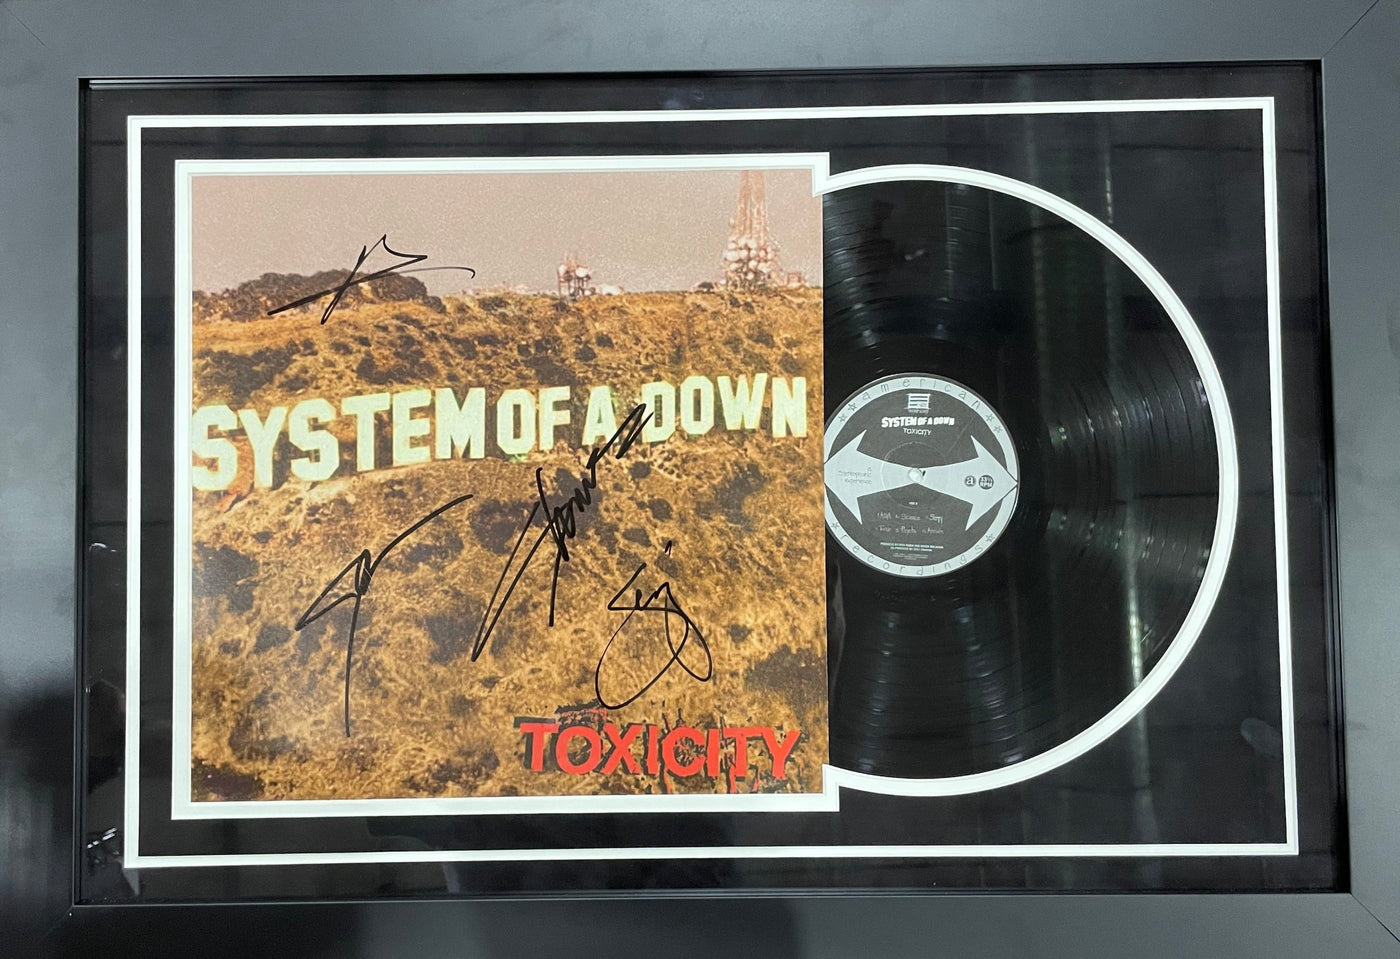 System of a Down Signed Autographed Toxicity Vinyl Record Album LP Framed - JSA COA